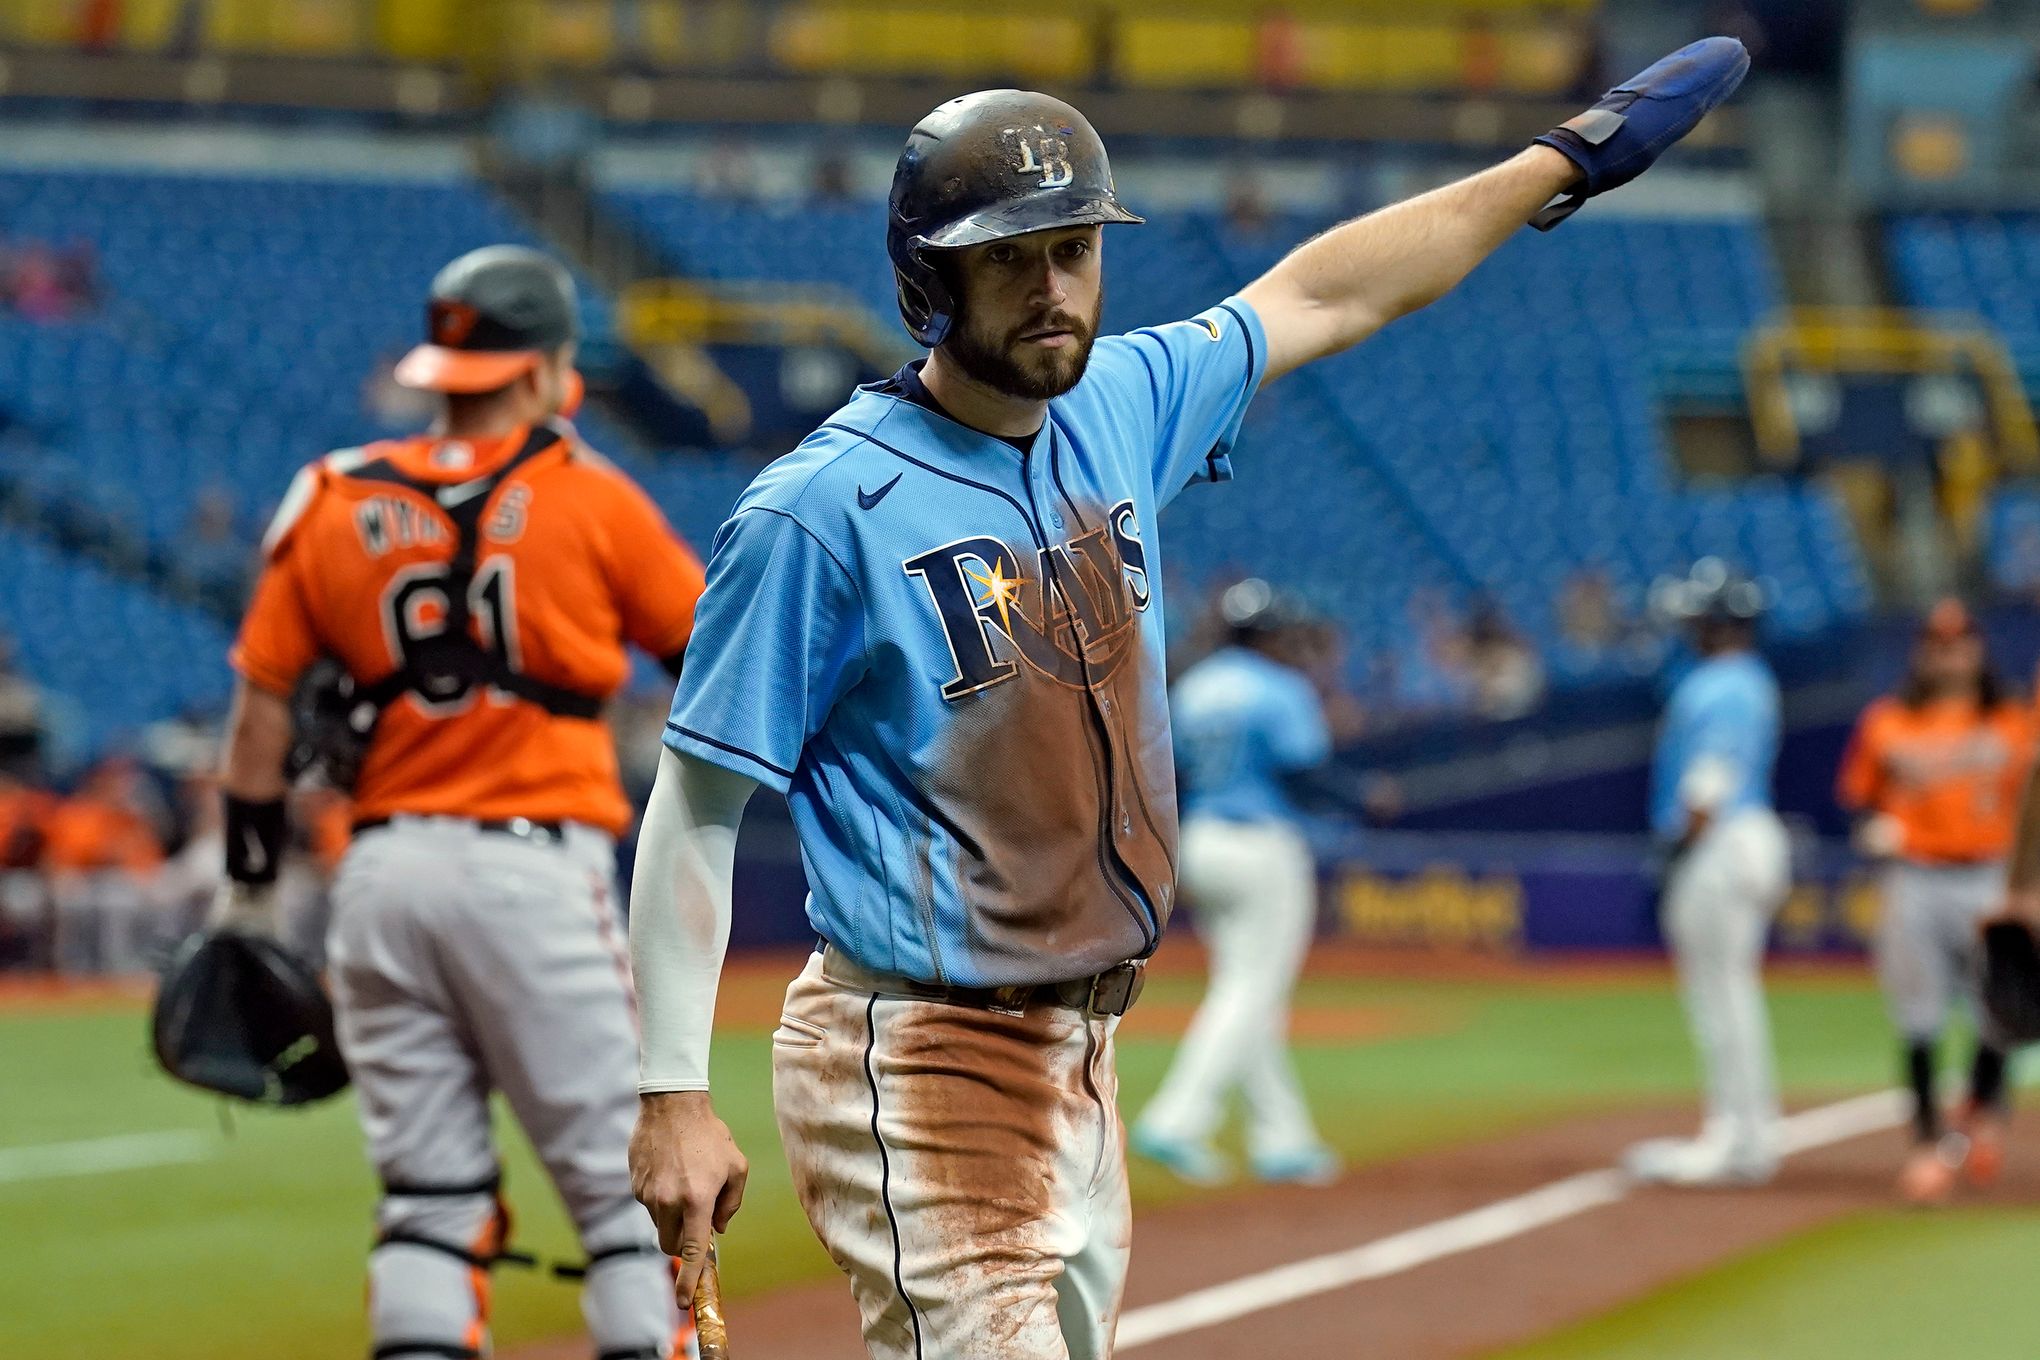 Rays hand Orioles record-setting 14th road loss in row, 5-4